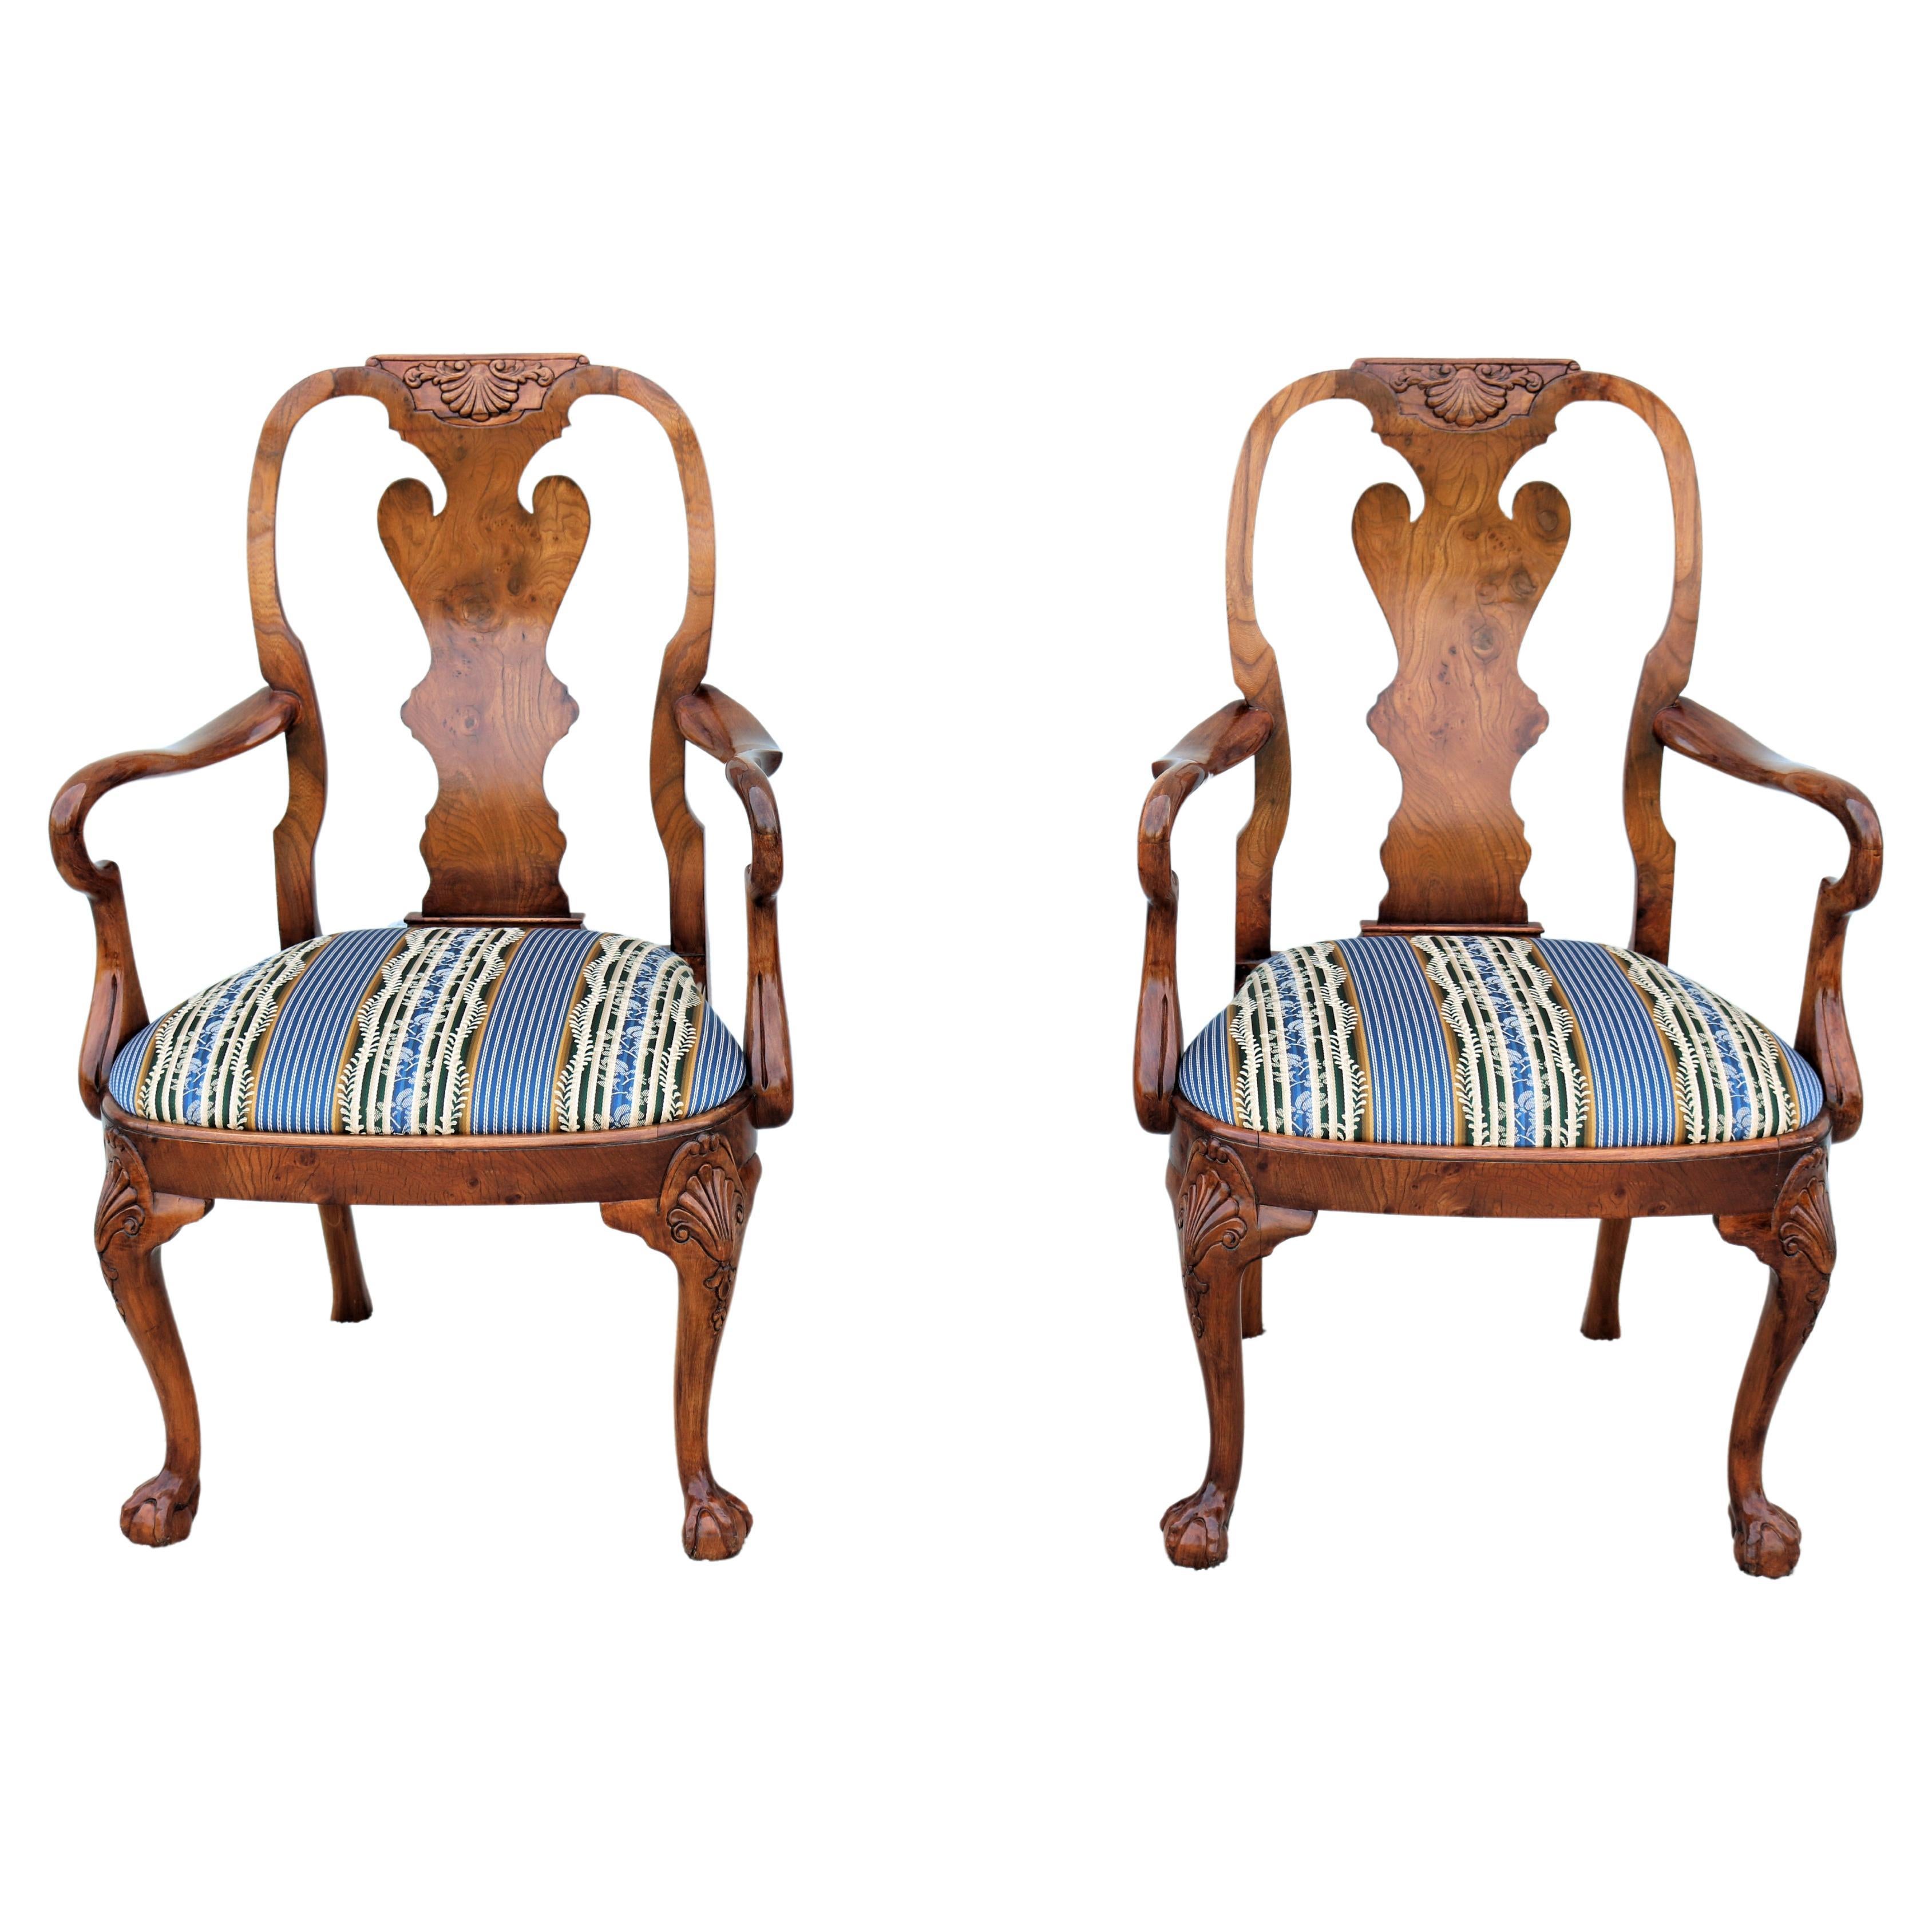 Vintage Traditional Giles Grendey Queen Anne Style Burl Walnut Armchairs, a Pair For Sale